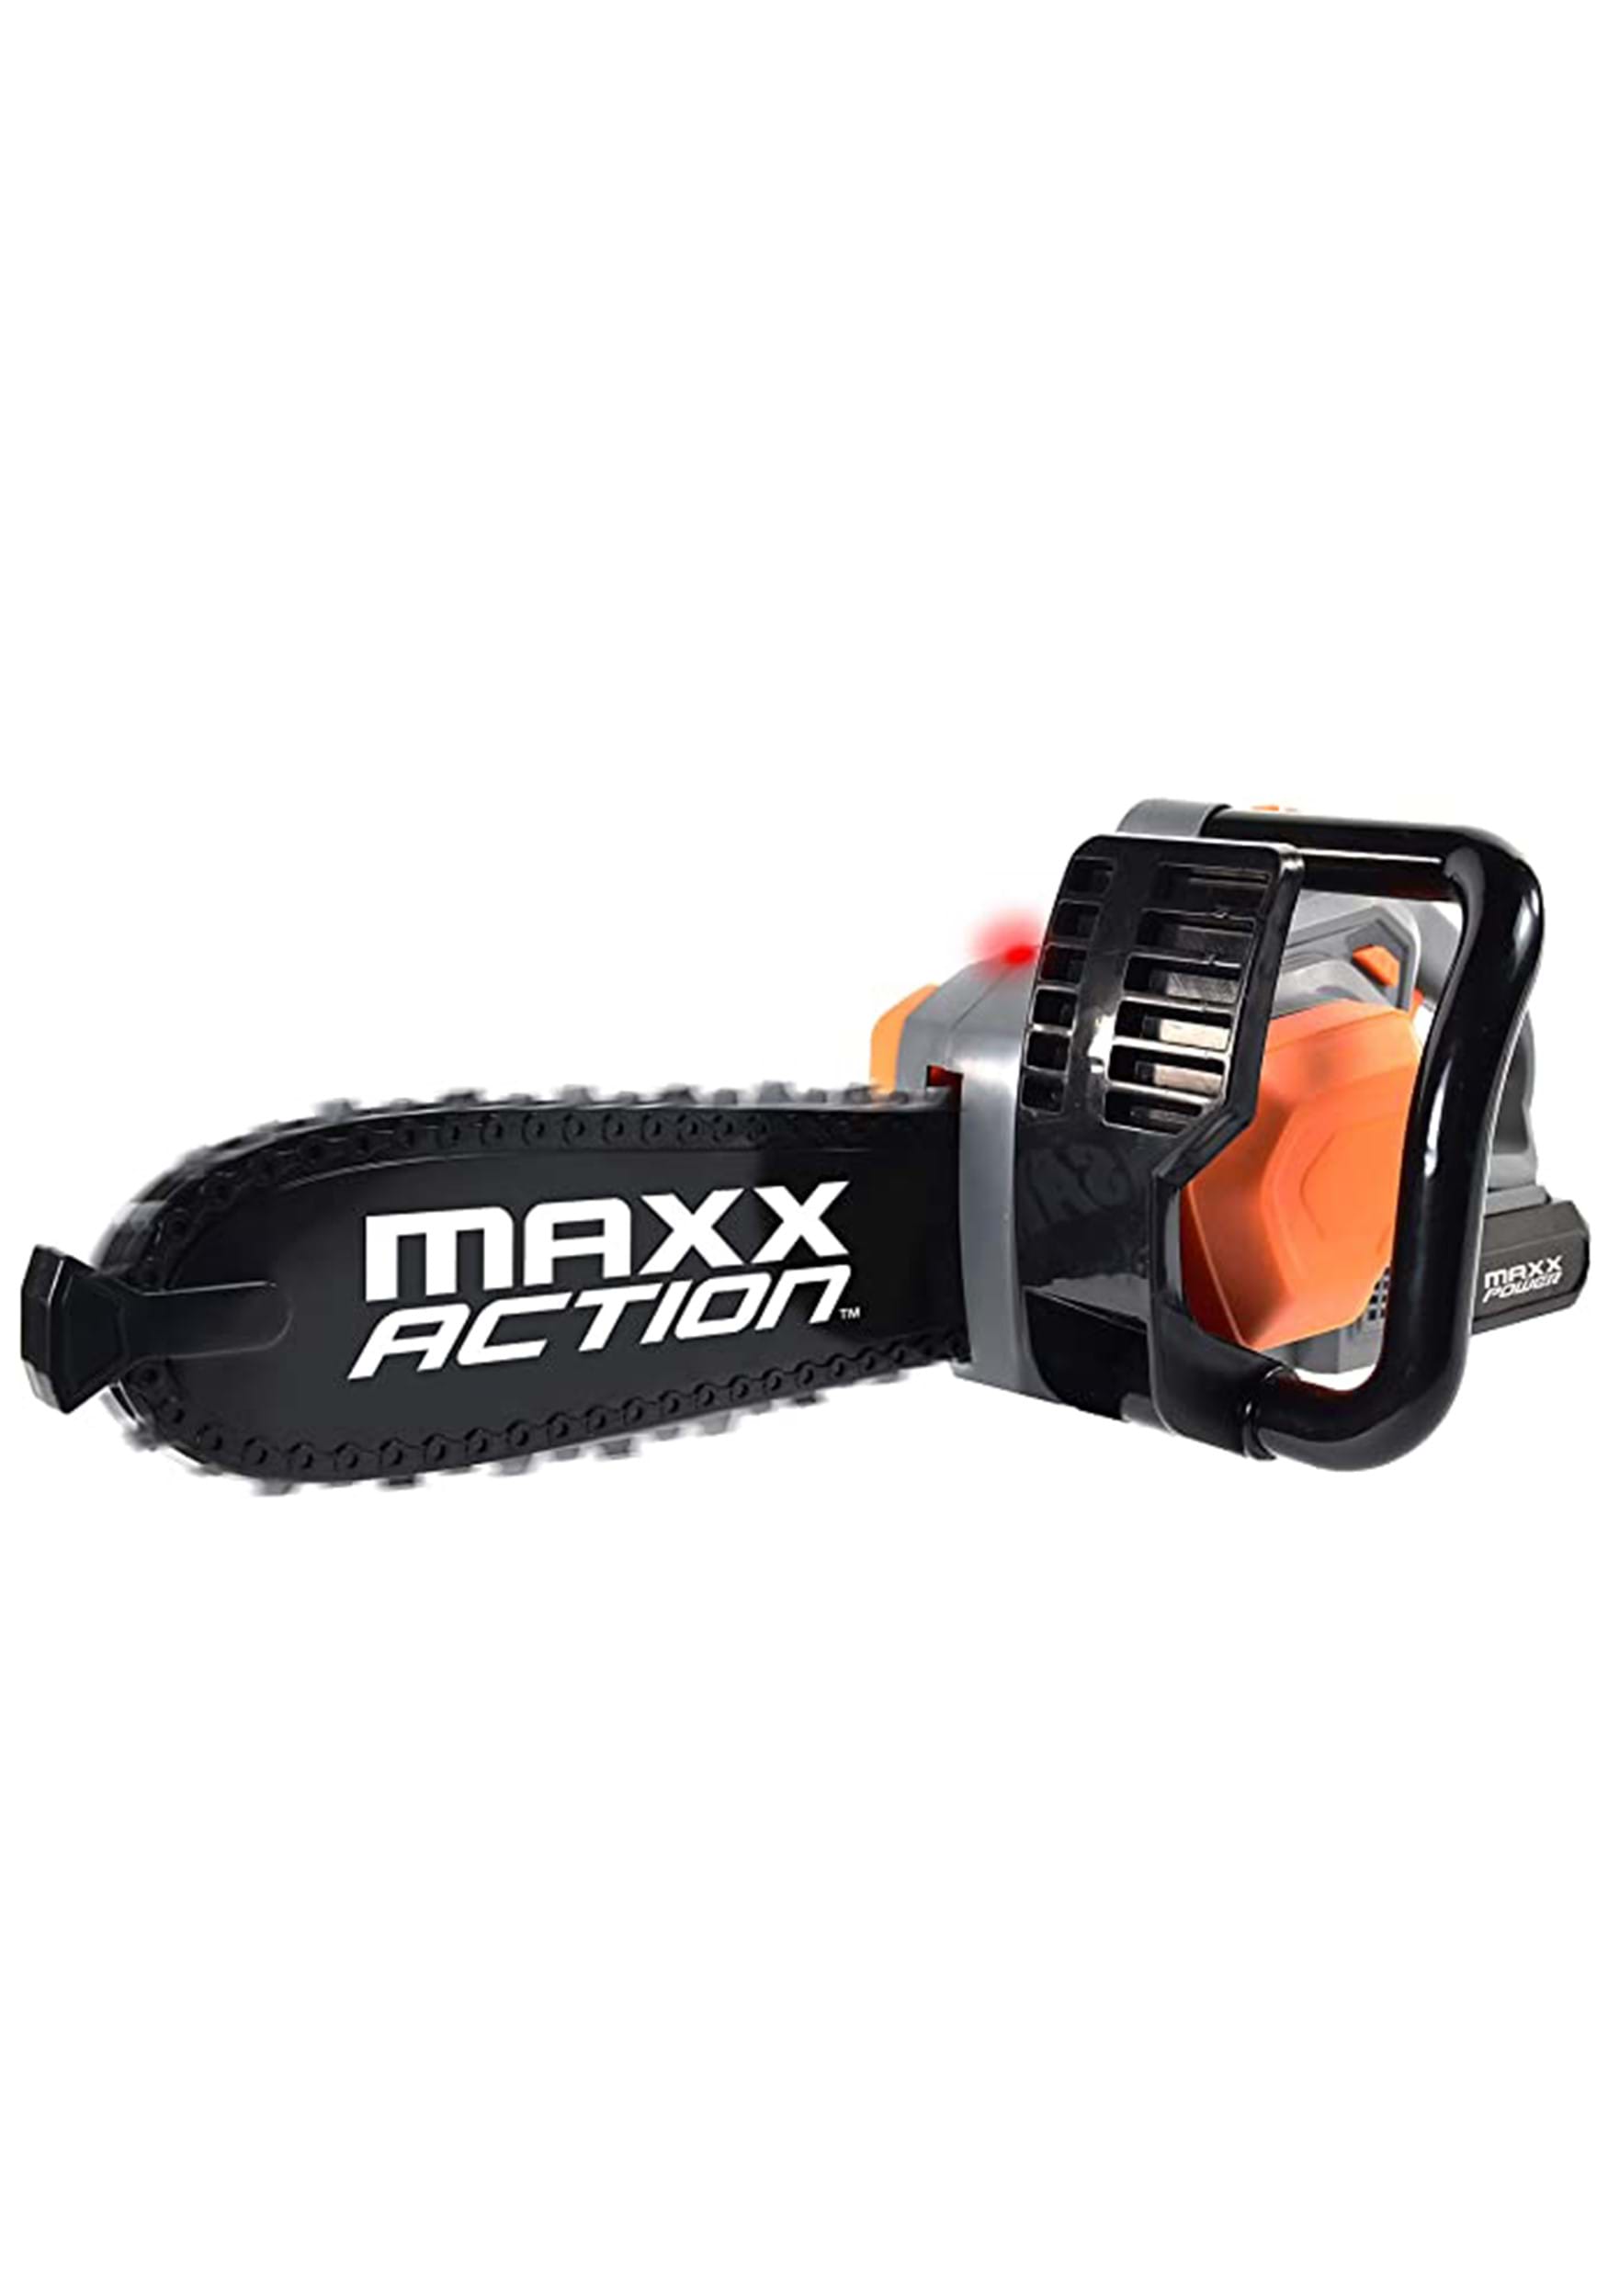 Maxx Action Power Tools Chainsaw Toy